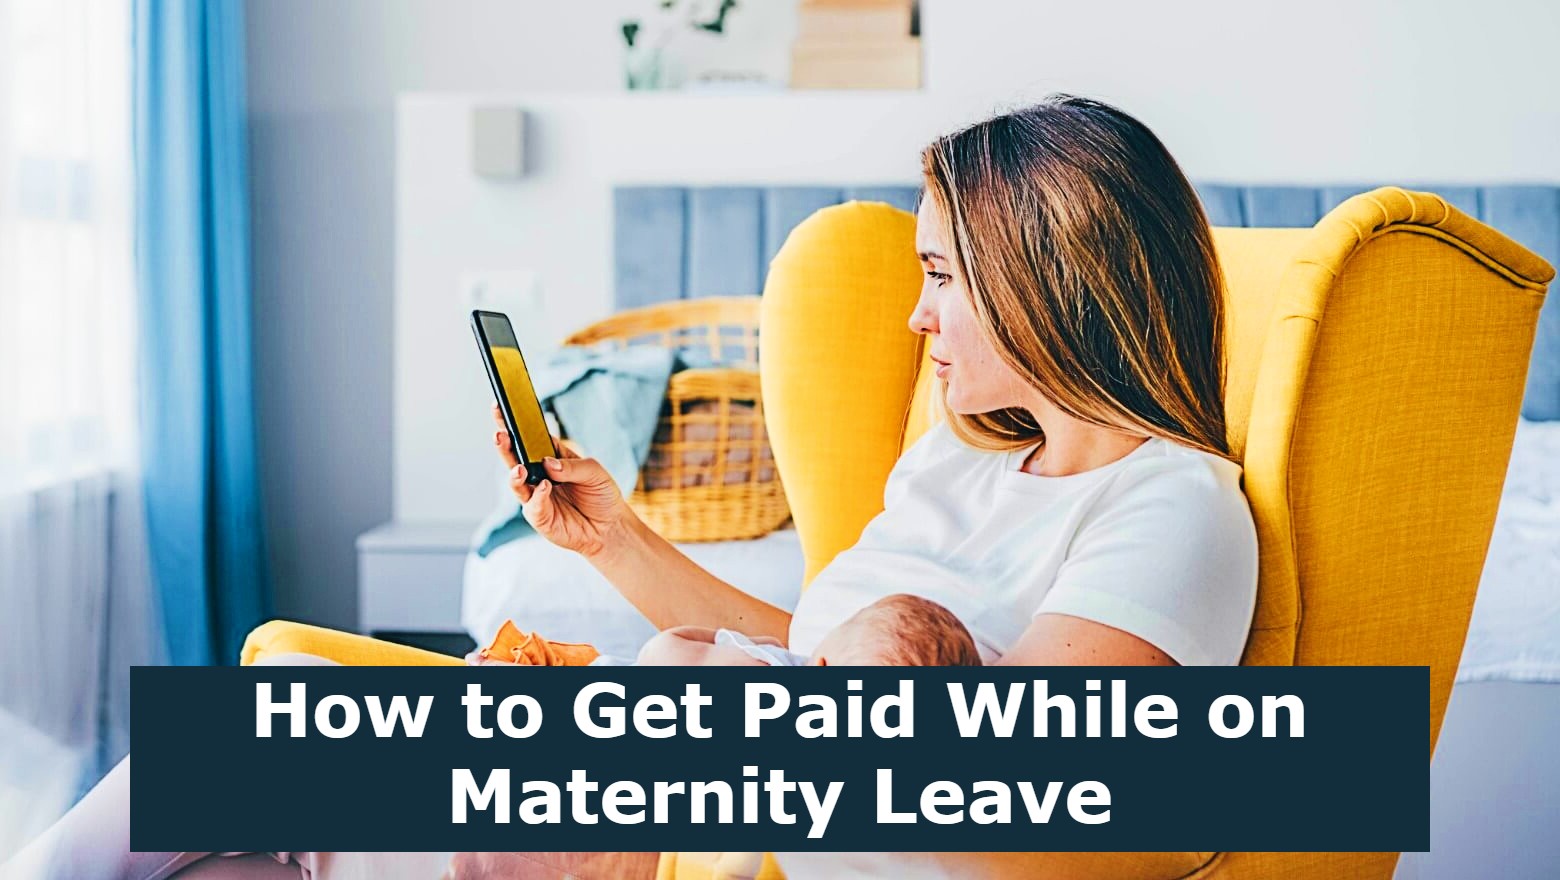 How to Get Paid While on Maternity Leave